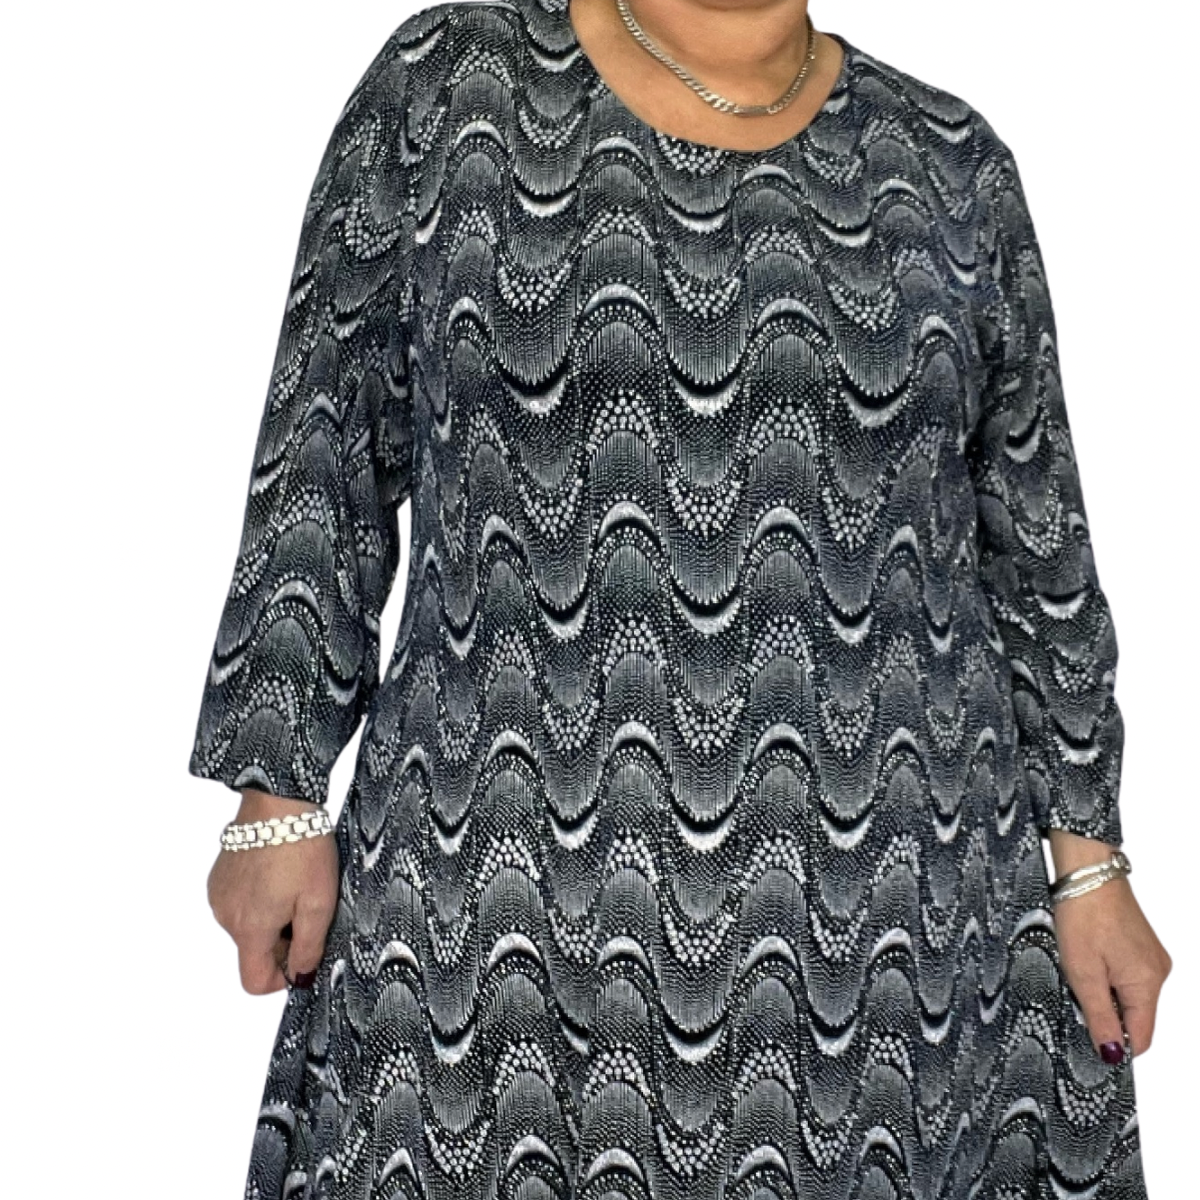 NAVY SPARKLY SWIRL PATTERN LONG SLEEVE PARTY SWING DRESS